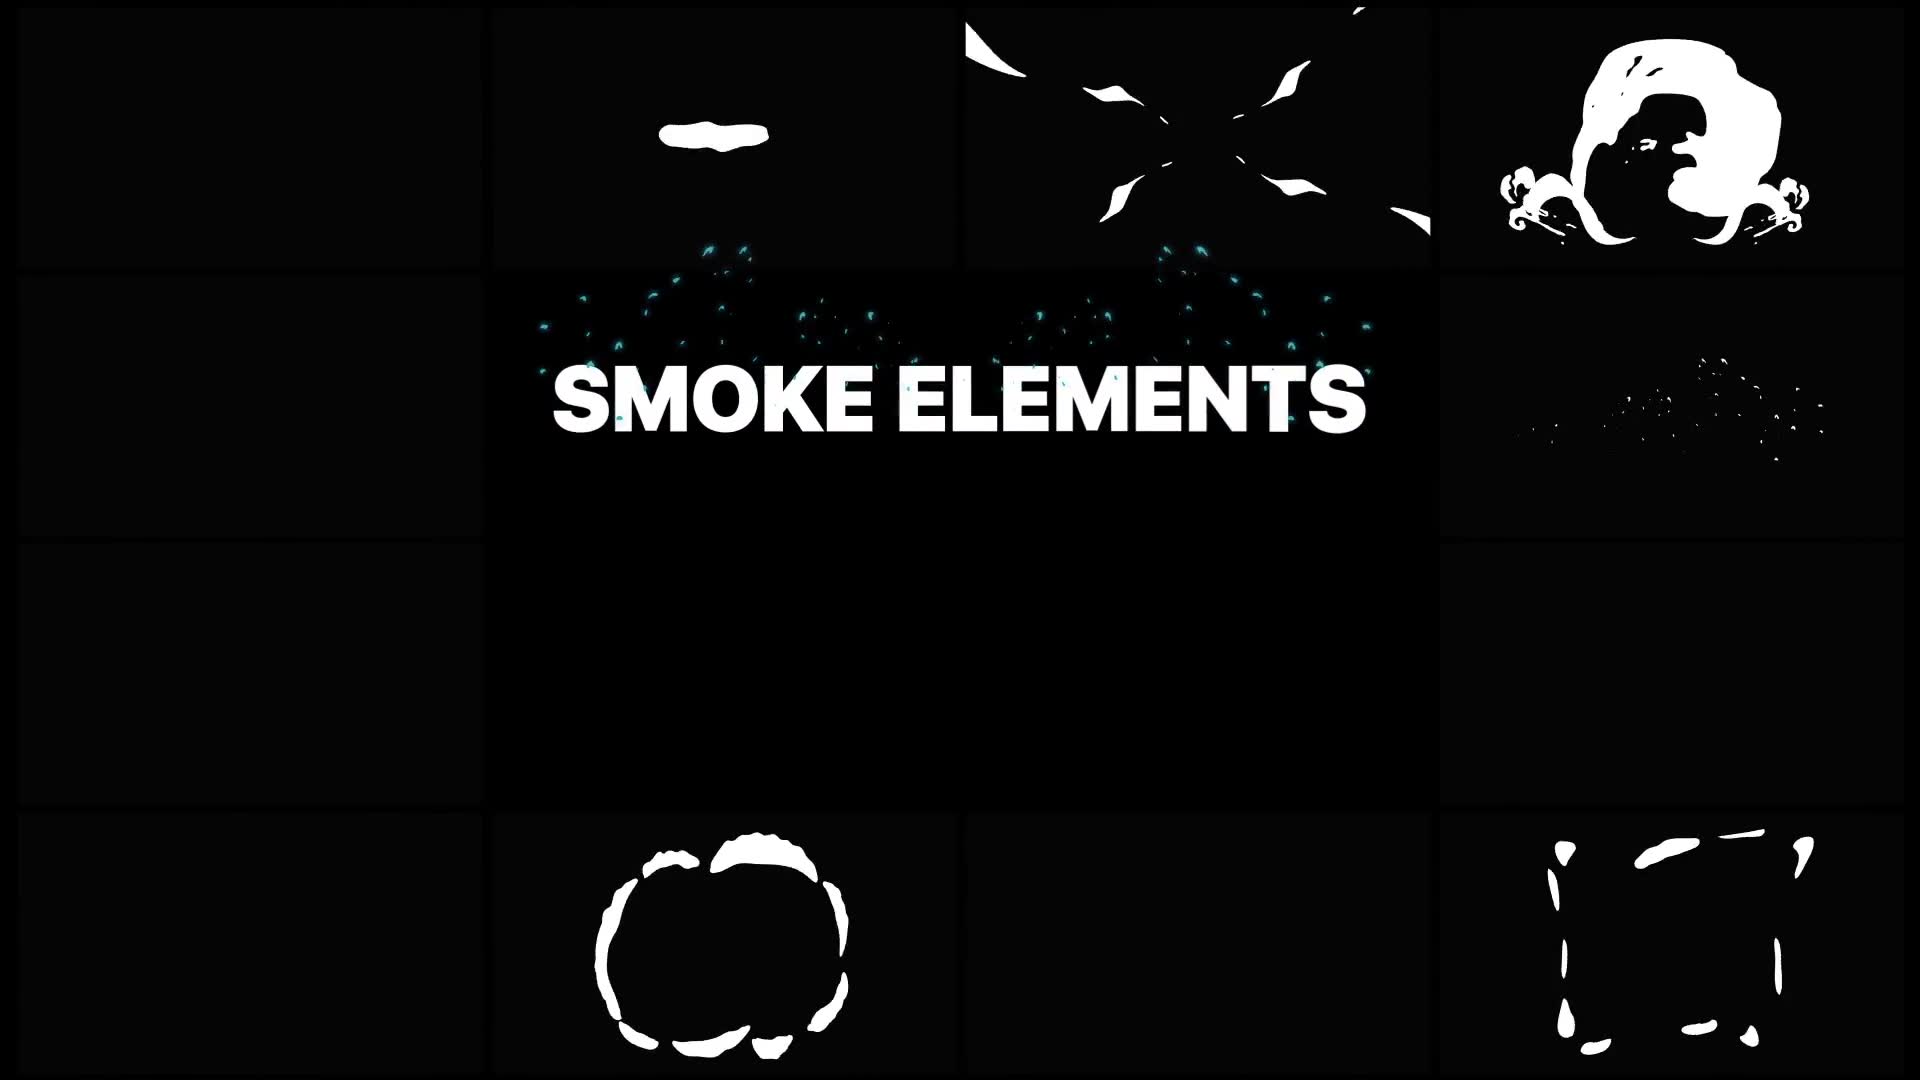 Smoke Elements Pack - Download Videohive 23314666